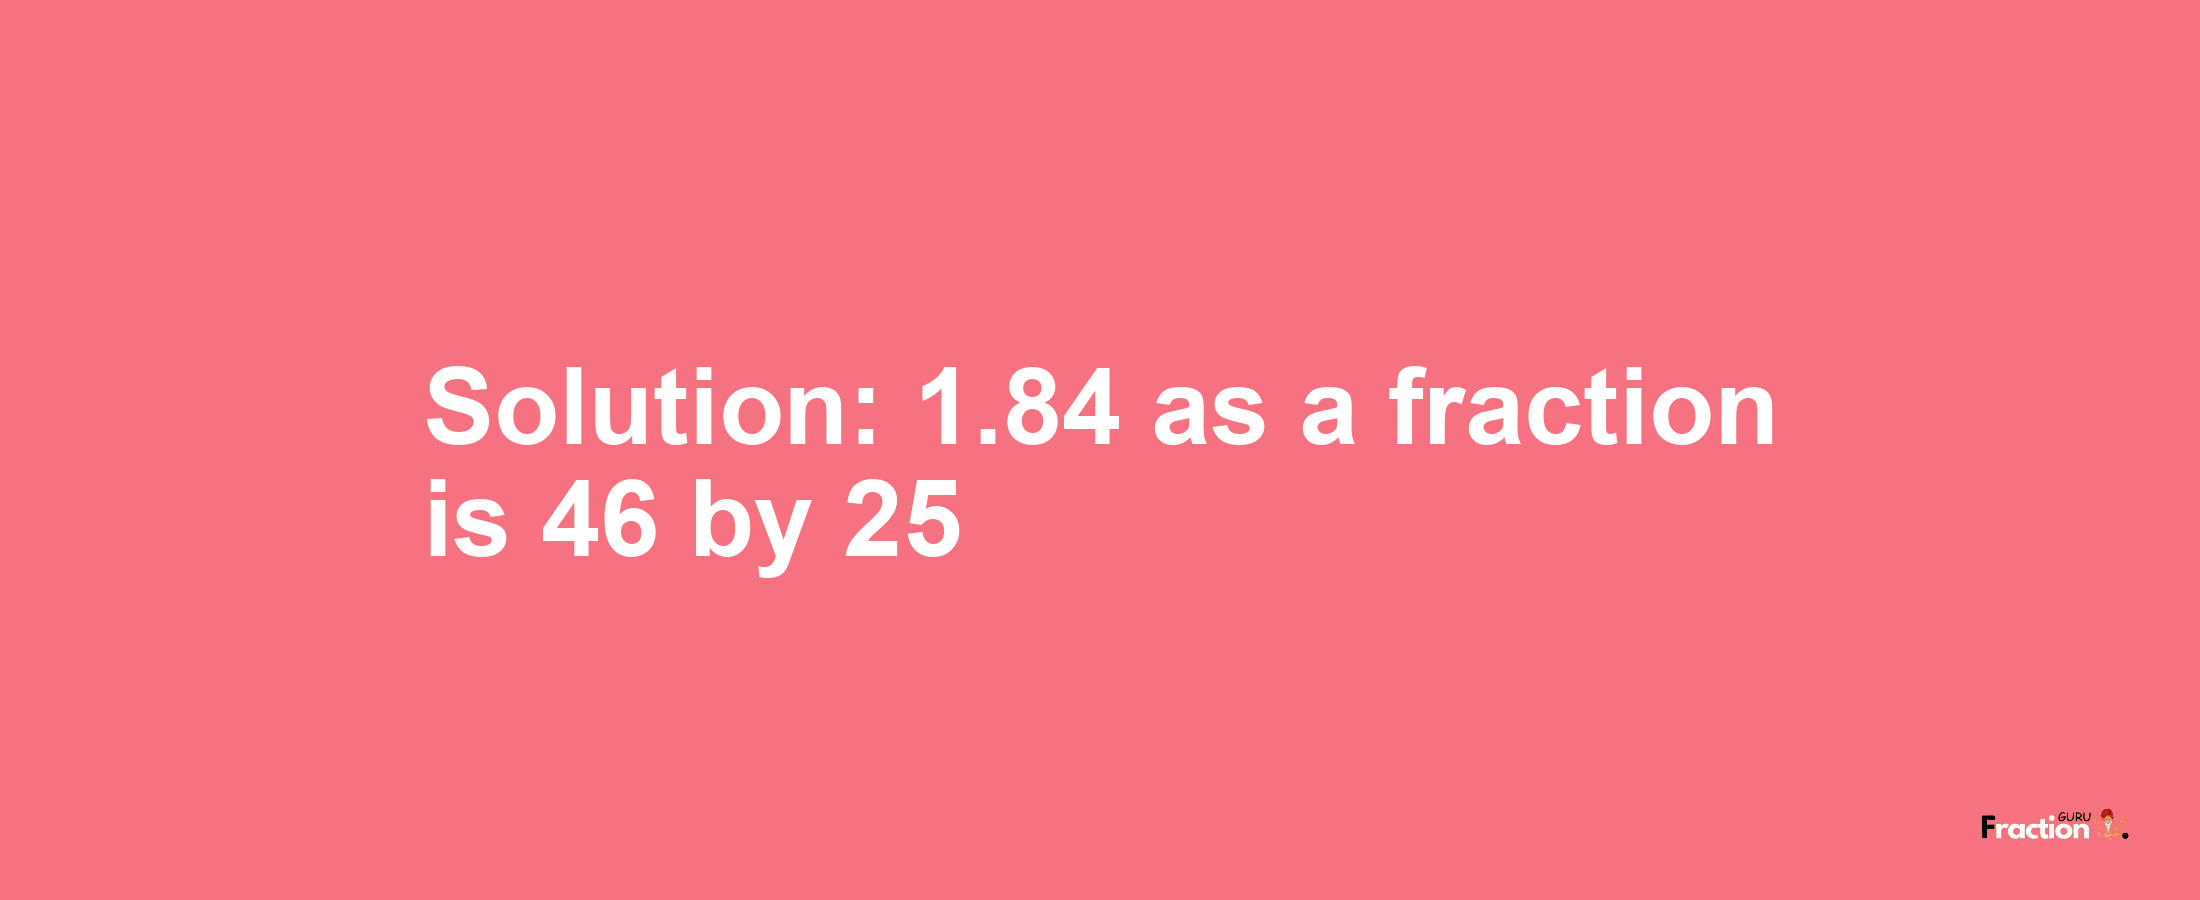 Solution:1.84 as a fraction is 46/25